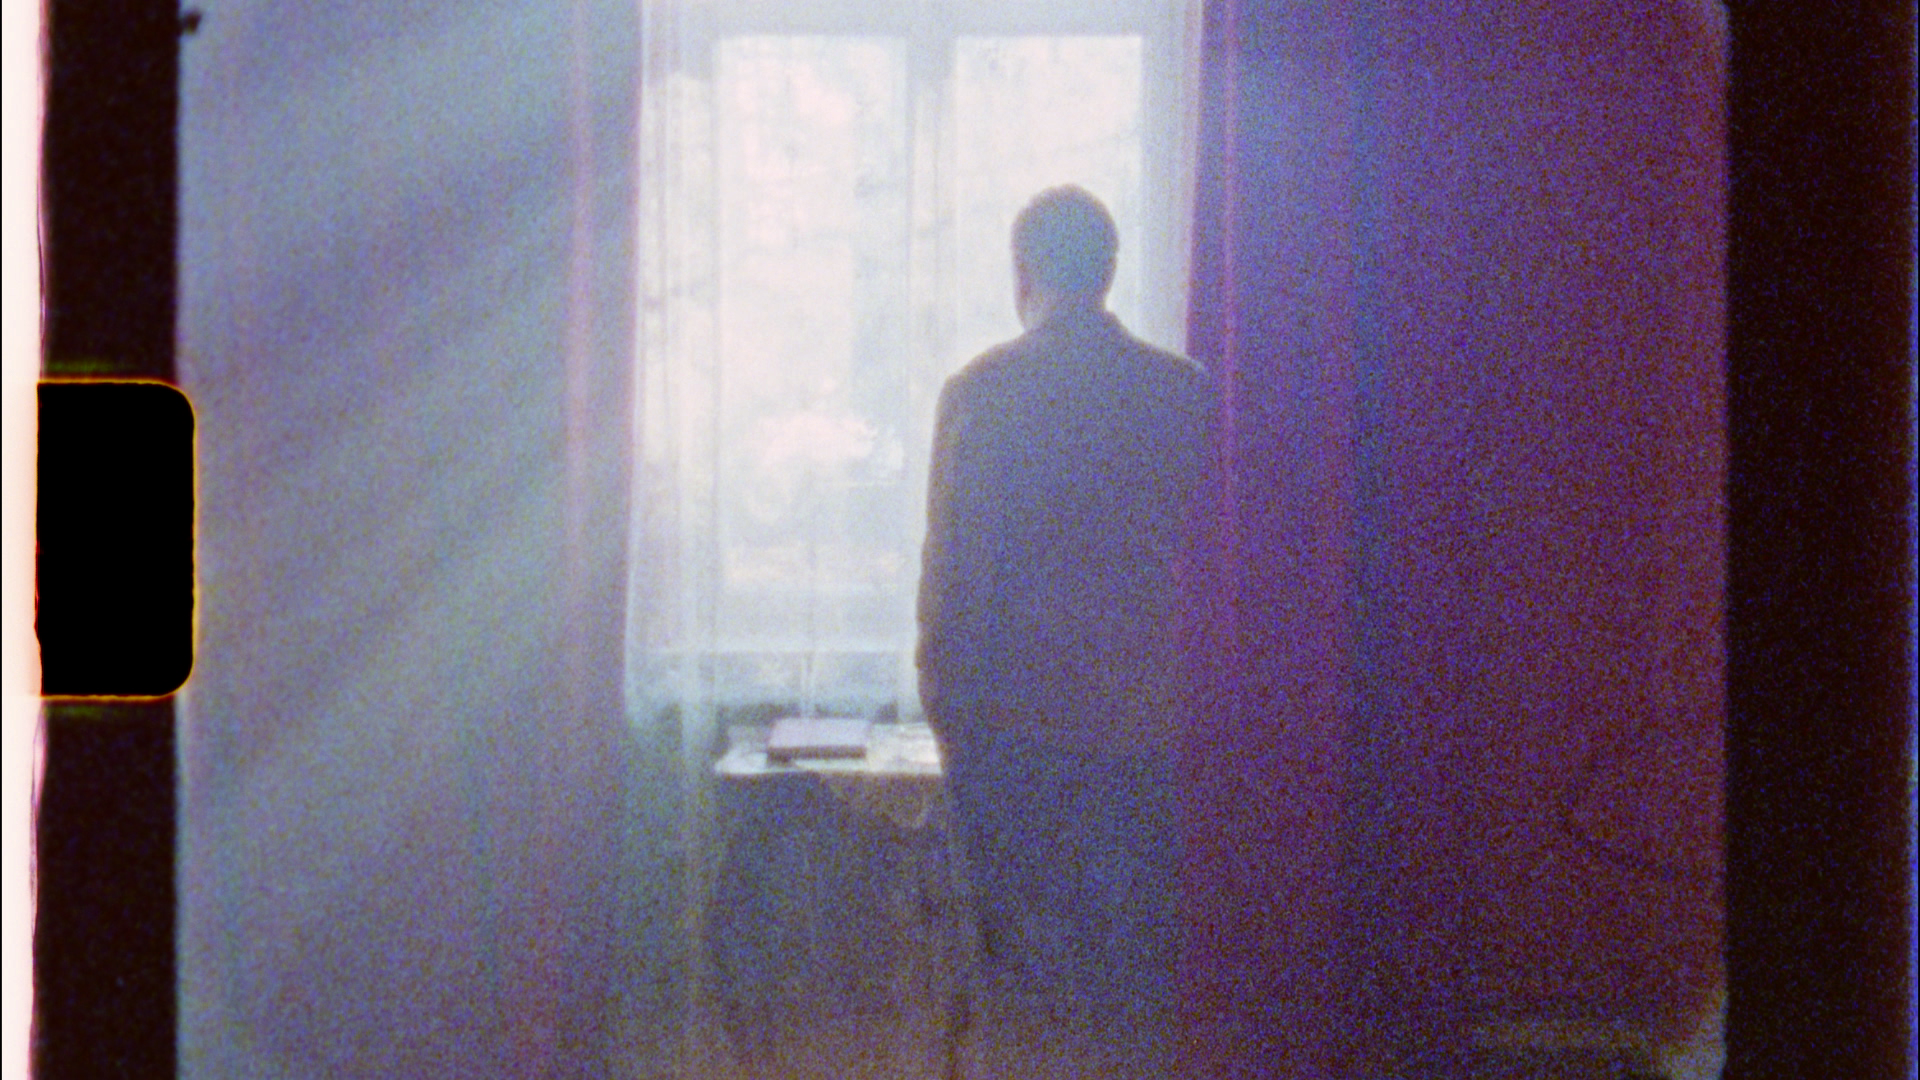 Still from The Prince and the Dybbuk. A man is standing in front of a brightly-lit window. The photo appears to be a copy of an analog film still. The composition is grainy and overexposed.